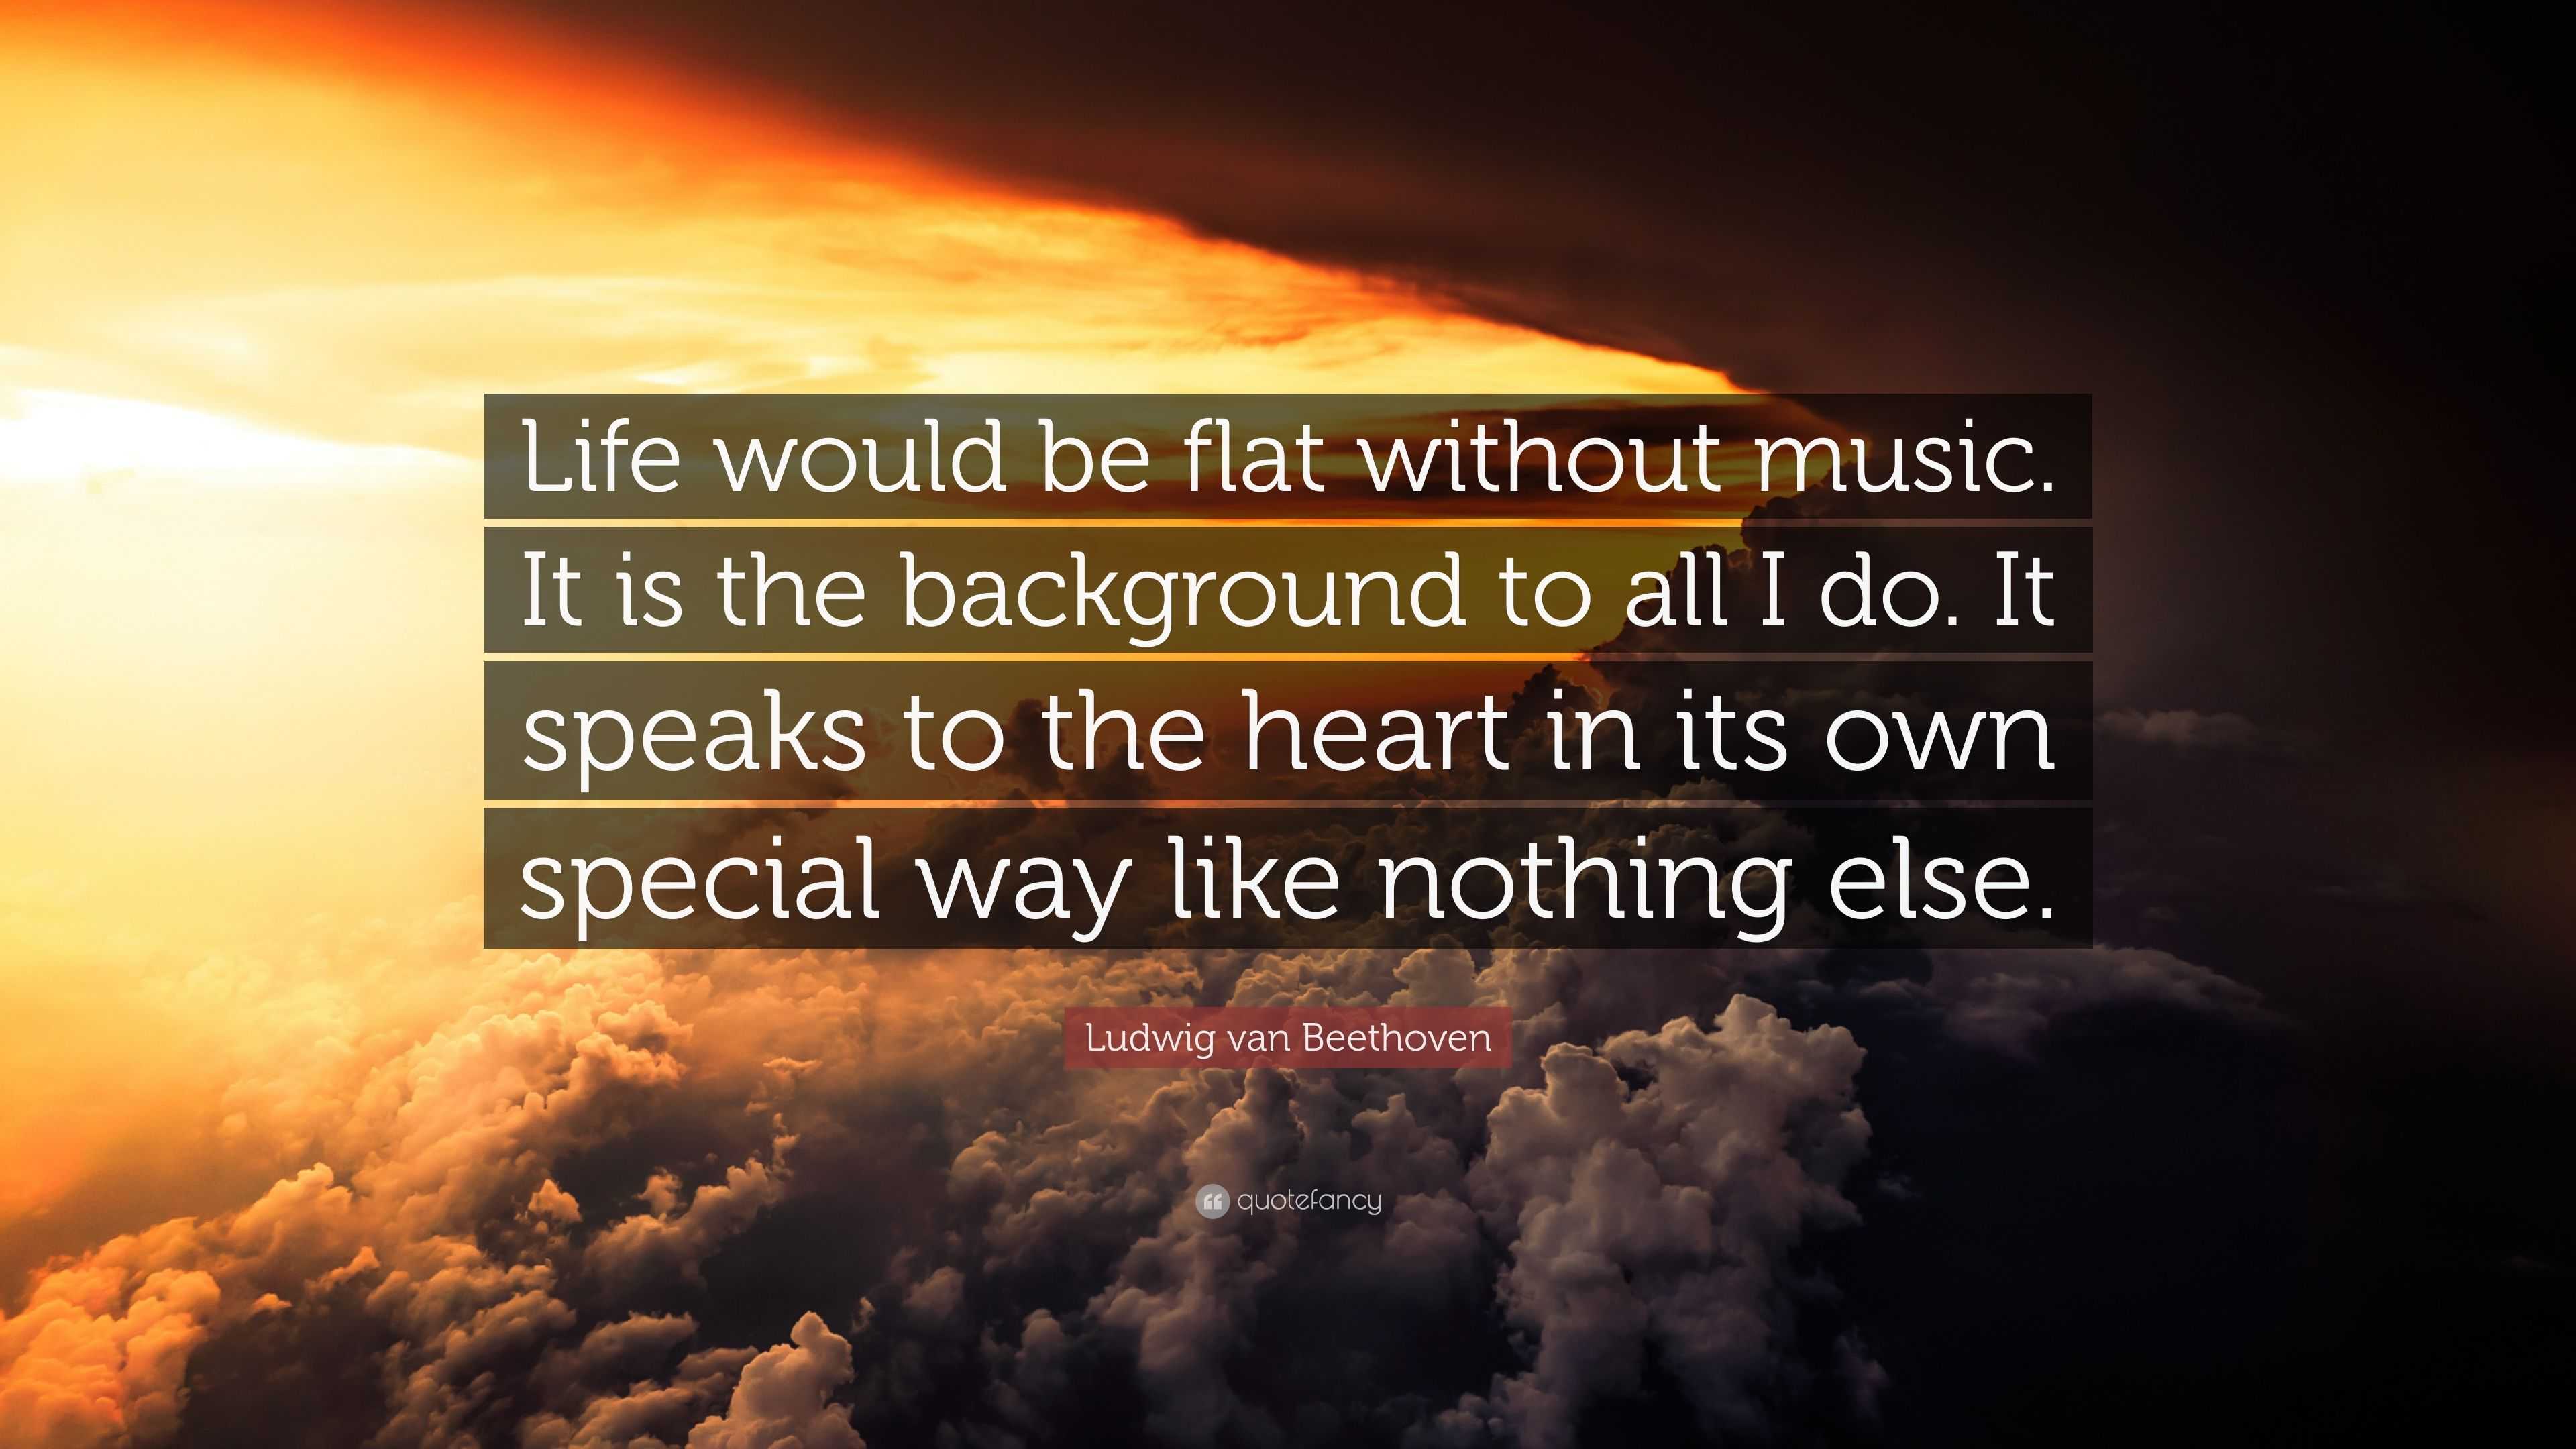 Ludwig van Beethoven Quote Life would be flat without 